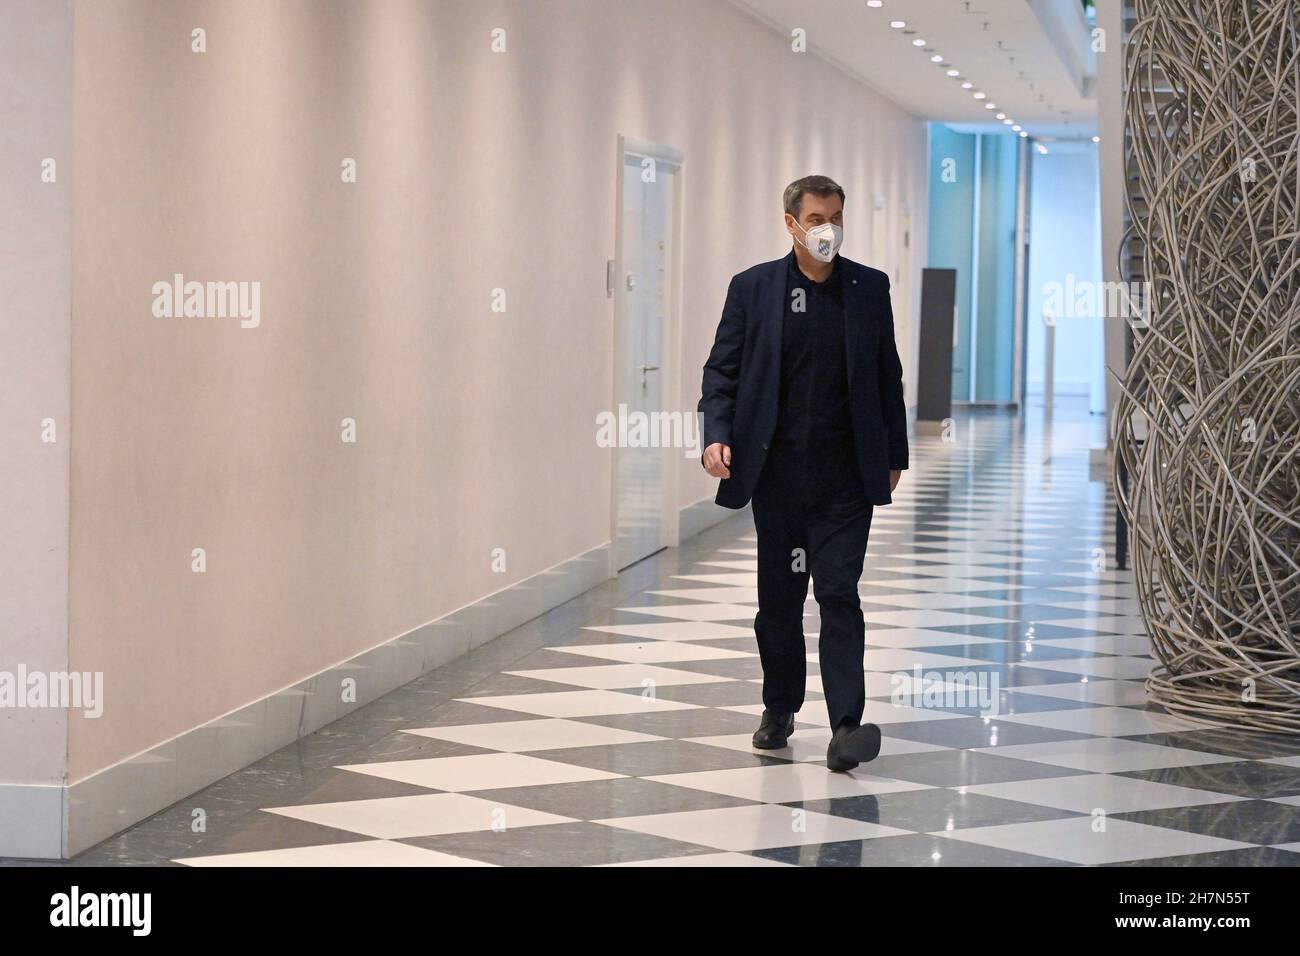 Markus SOEDER (Prime Minister Bavaria and CSU Chairman) walks alone down a long hallway. Press appointment for flu vaccination Prime Minister Soeder and Health Minister Holetschek on November 24th, 2021 in the Bavarian State Chancellery in Munich. Stock Photo